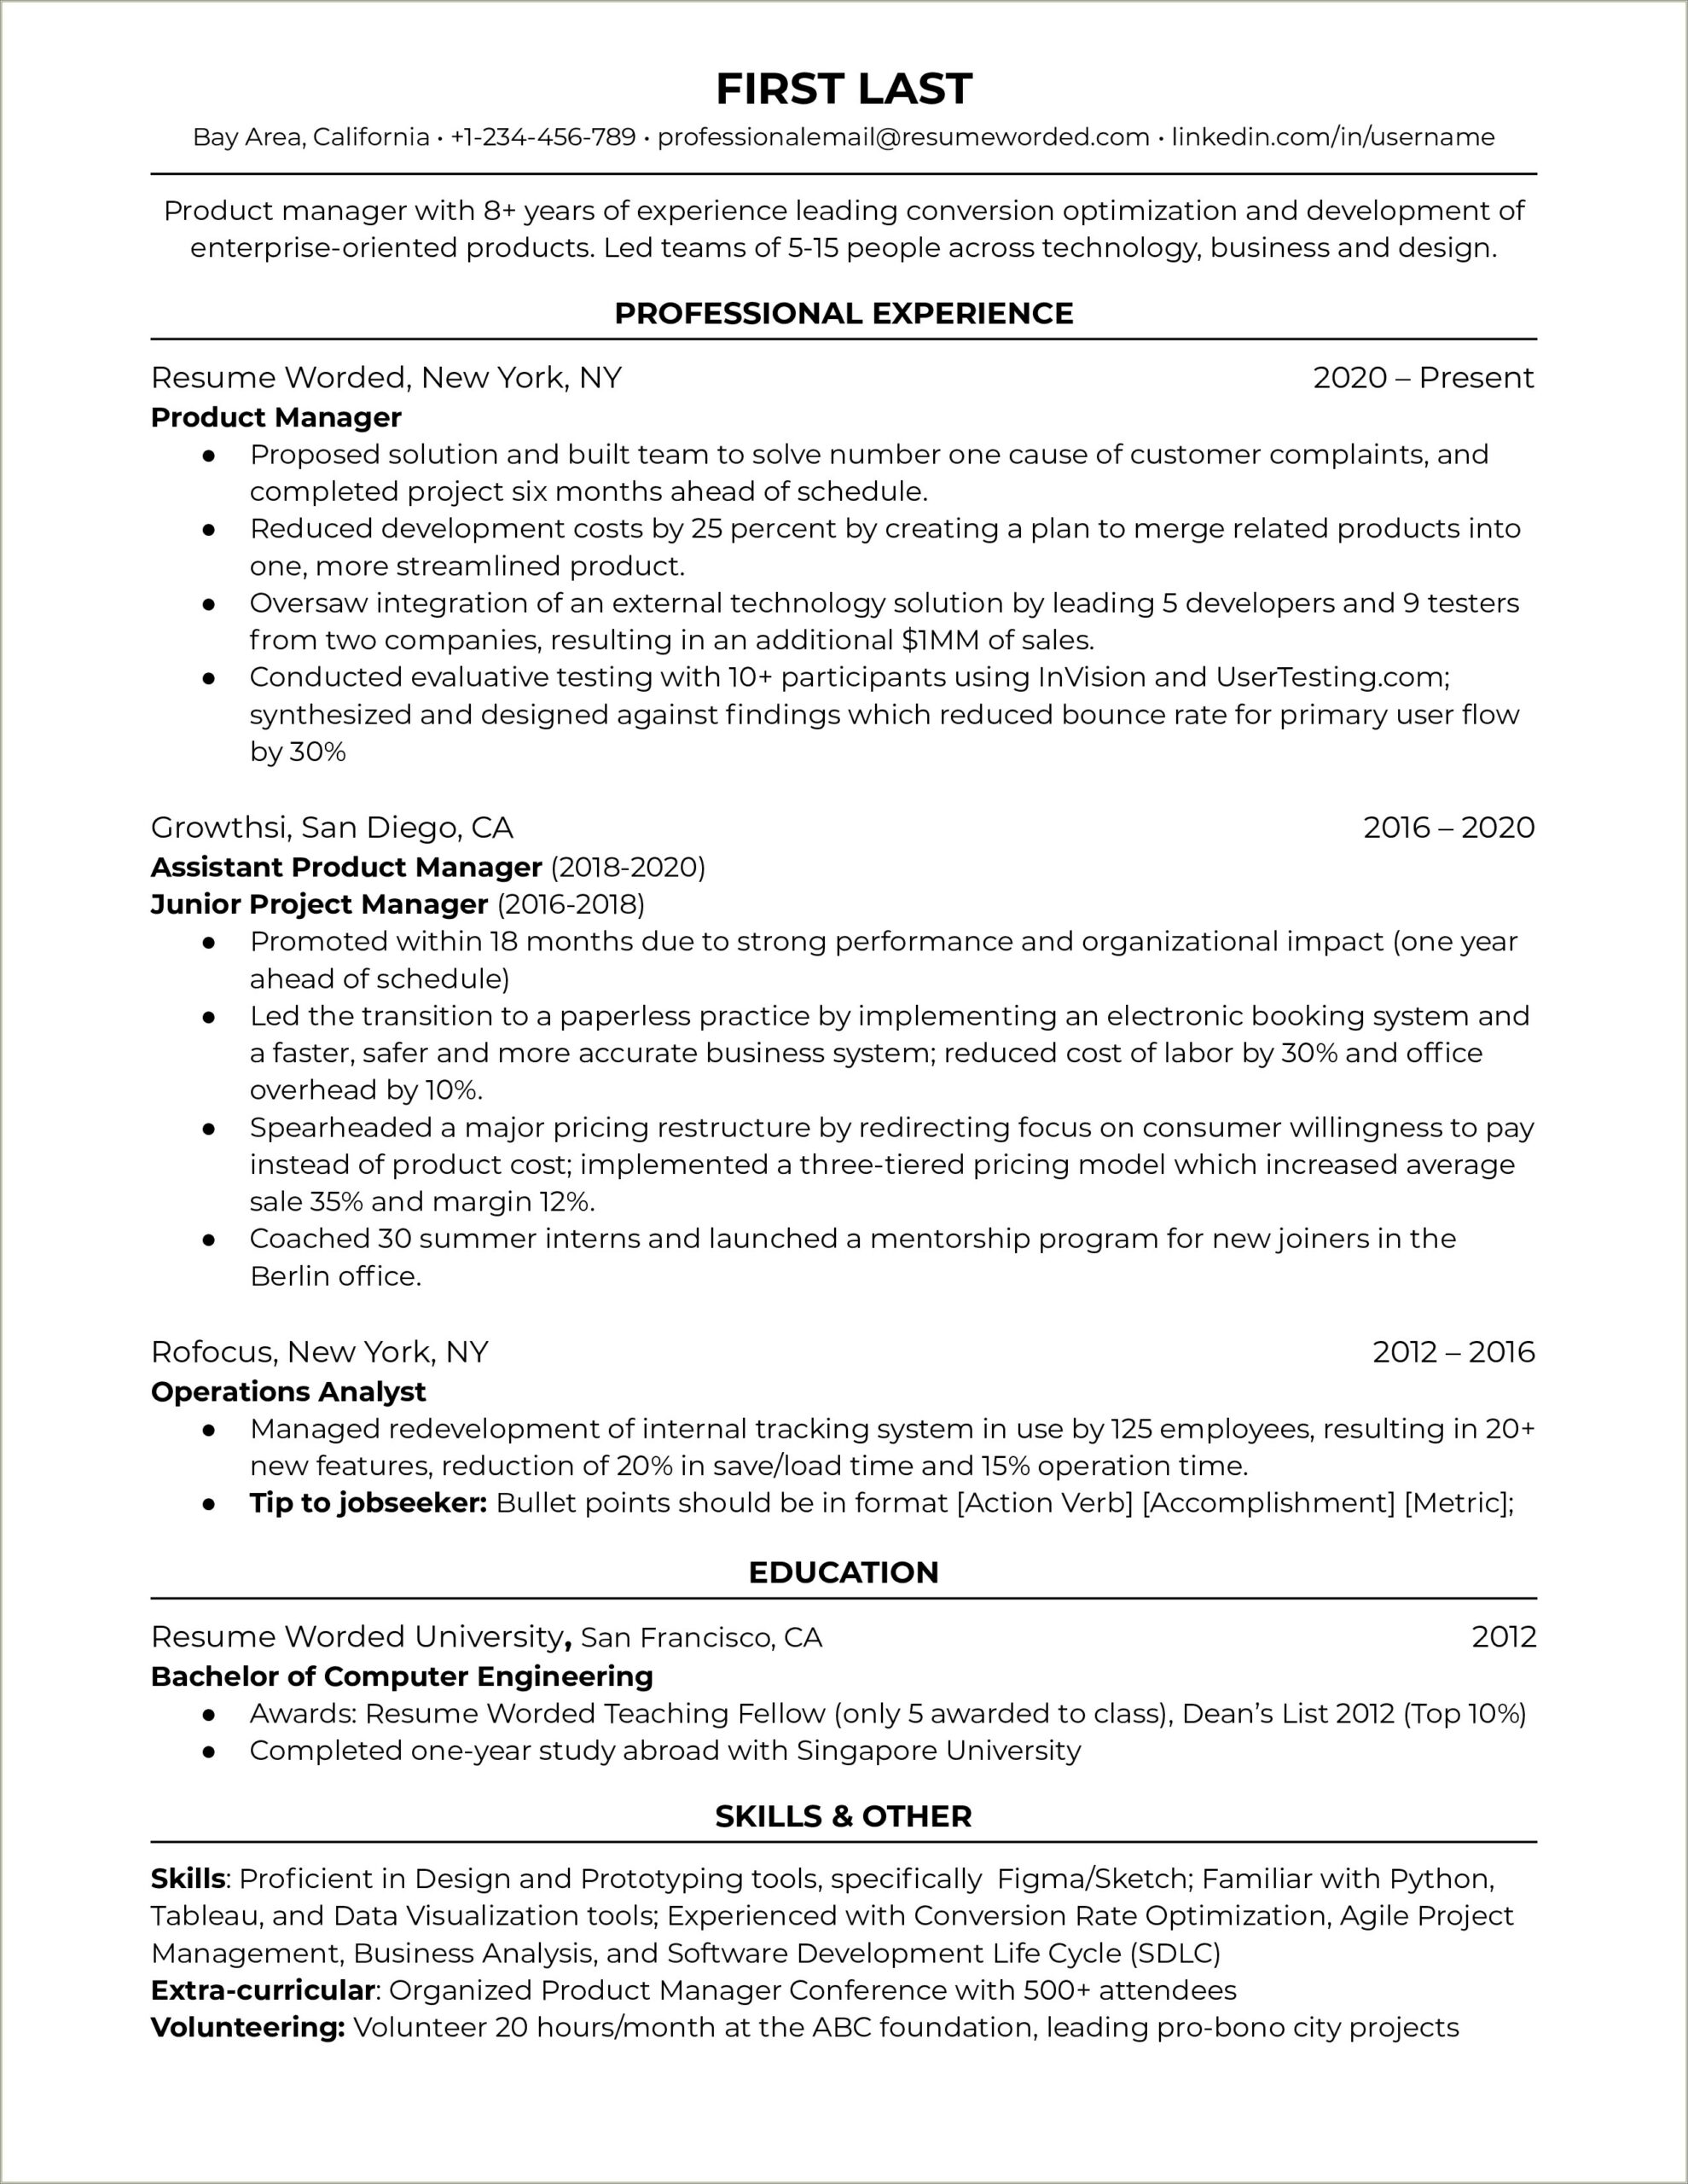 Best Proffesional Skills For A Production Resume